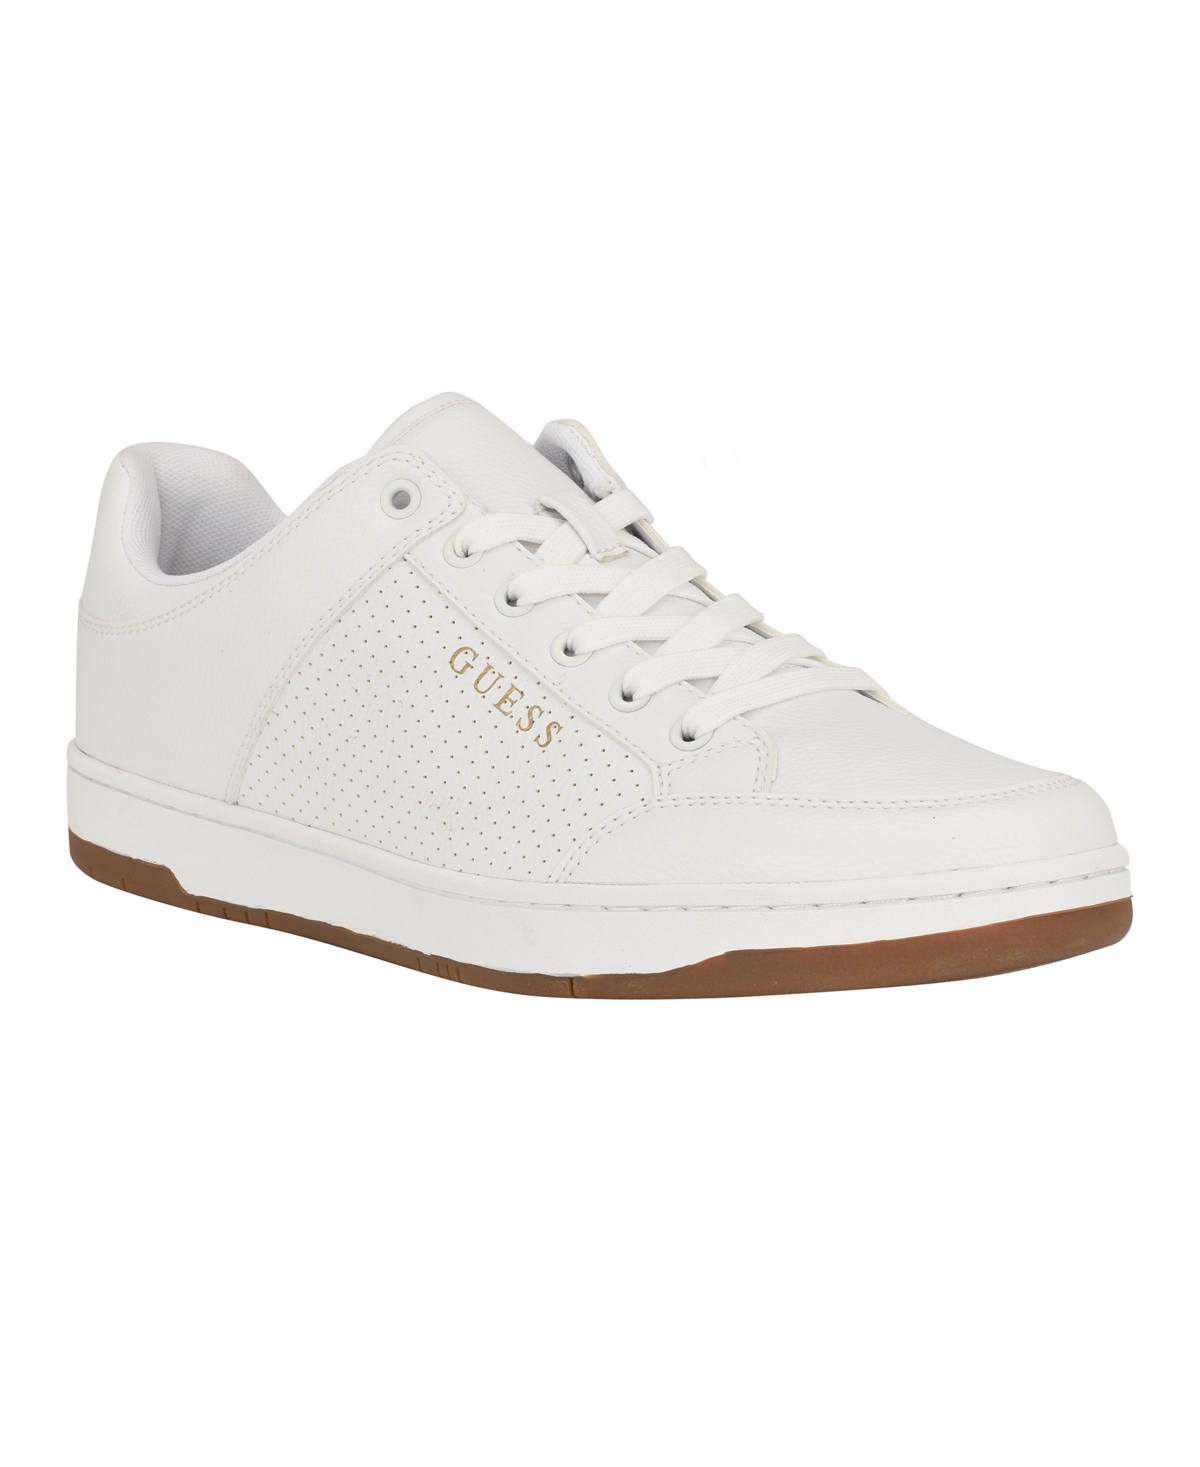 GUESS MEN'S TEMPO LOW TOP LACE UP FASHION SNEAKERS